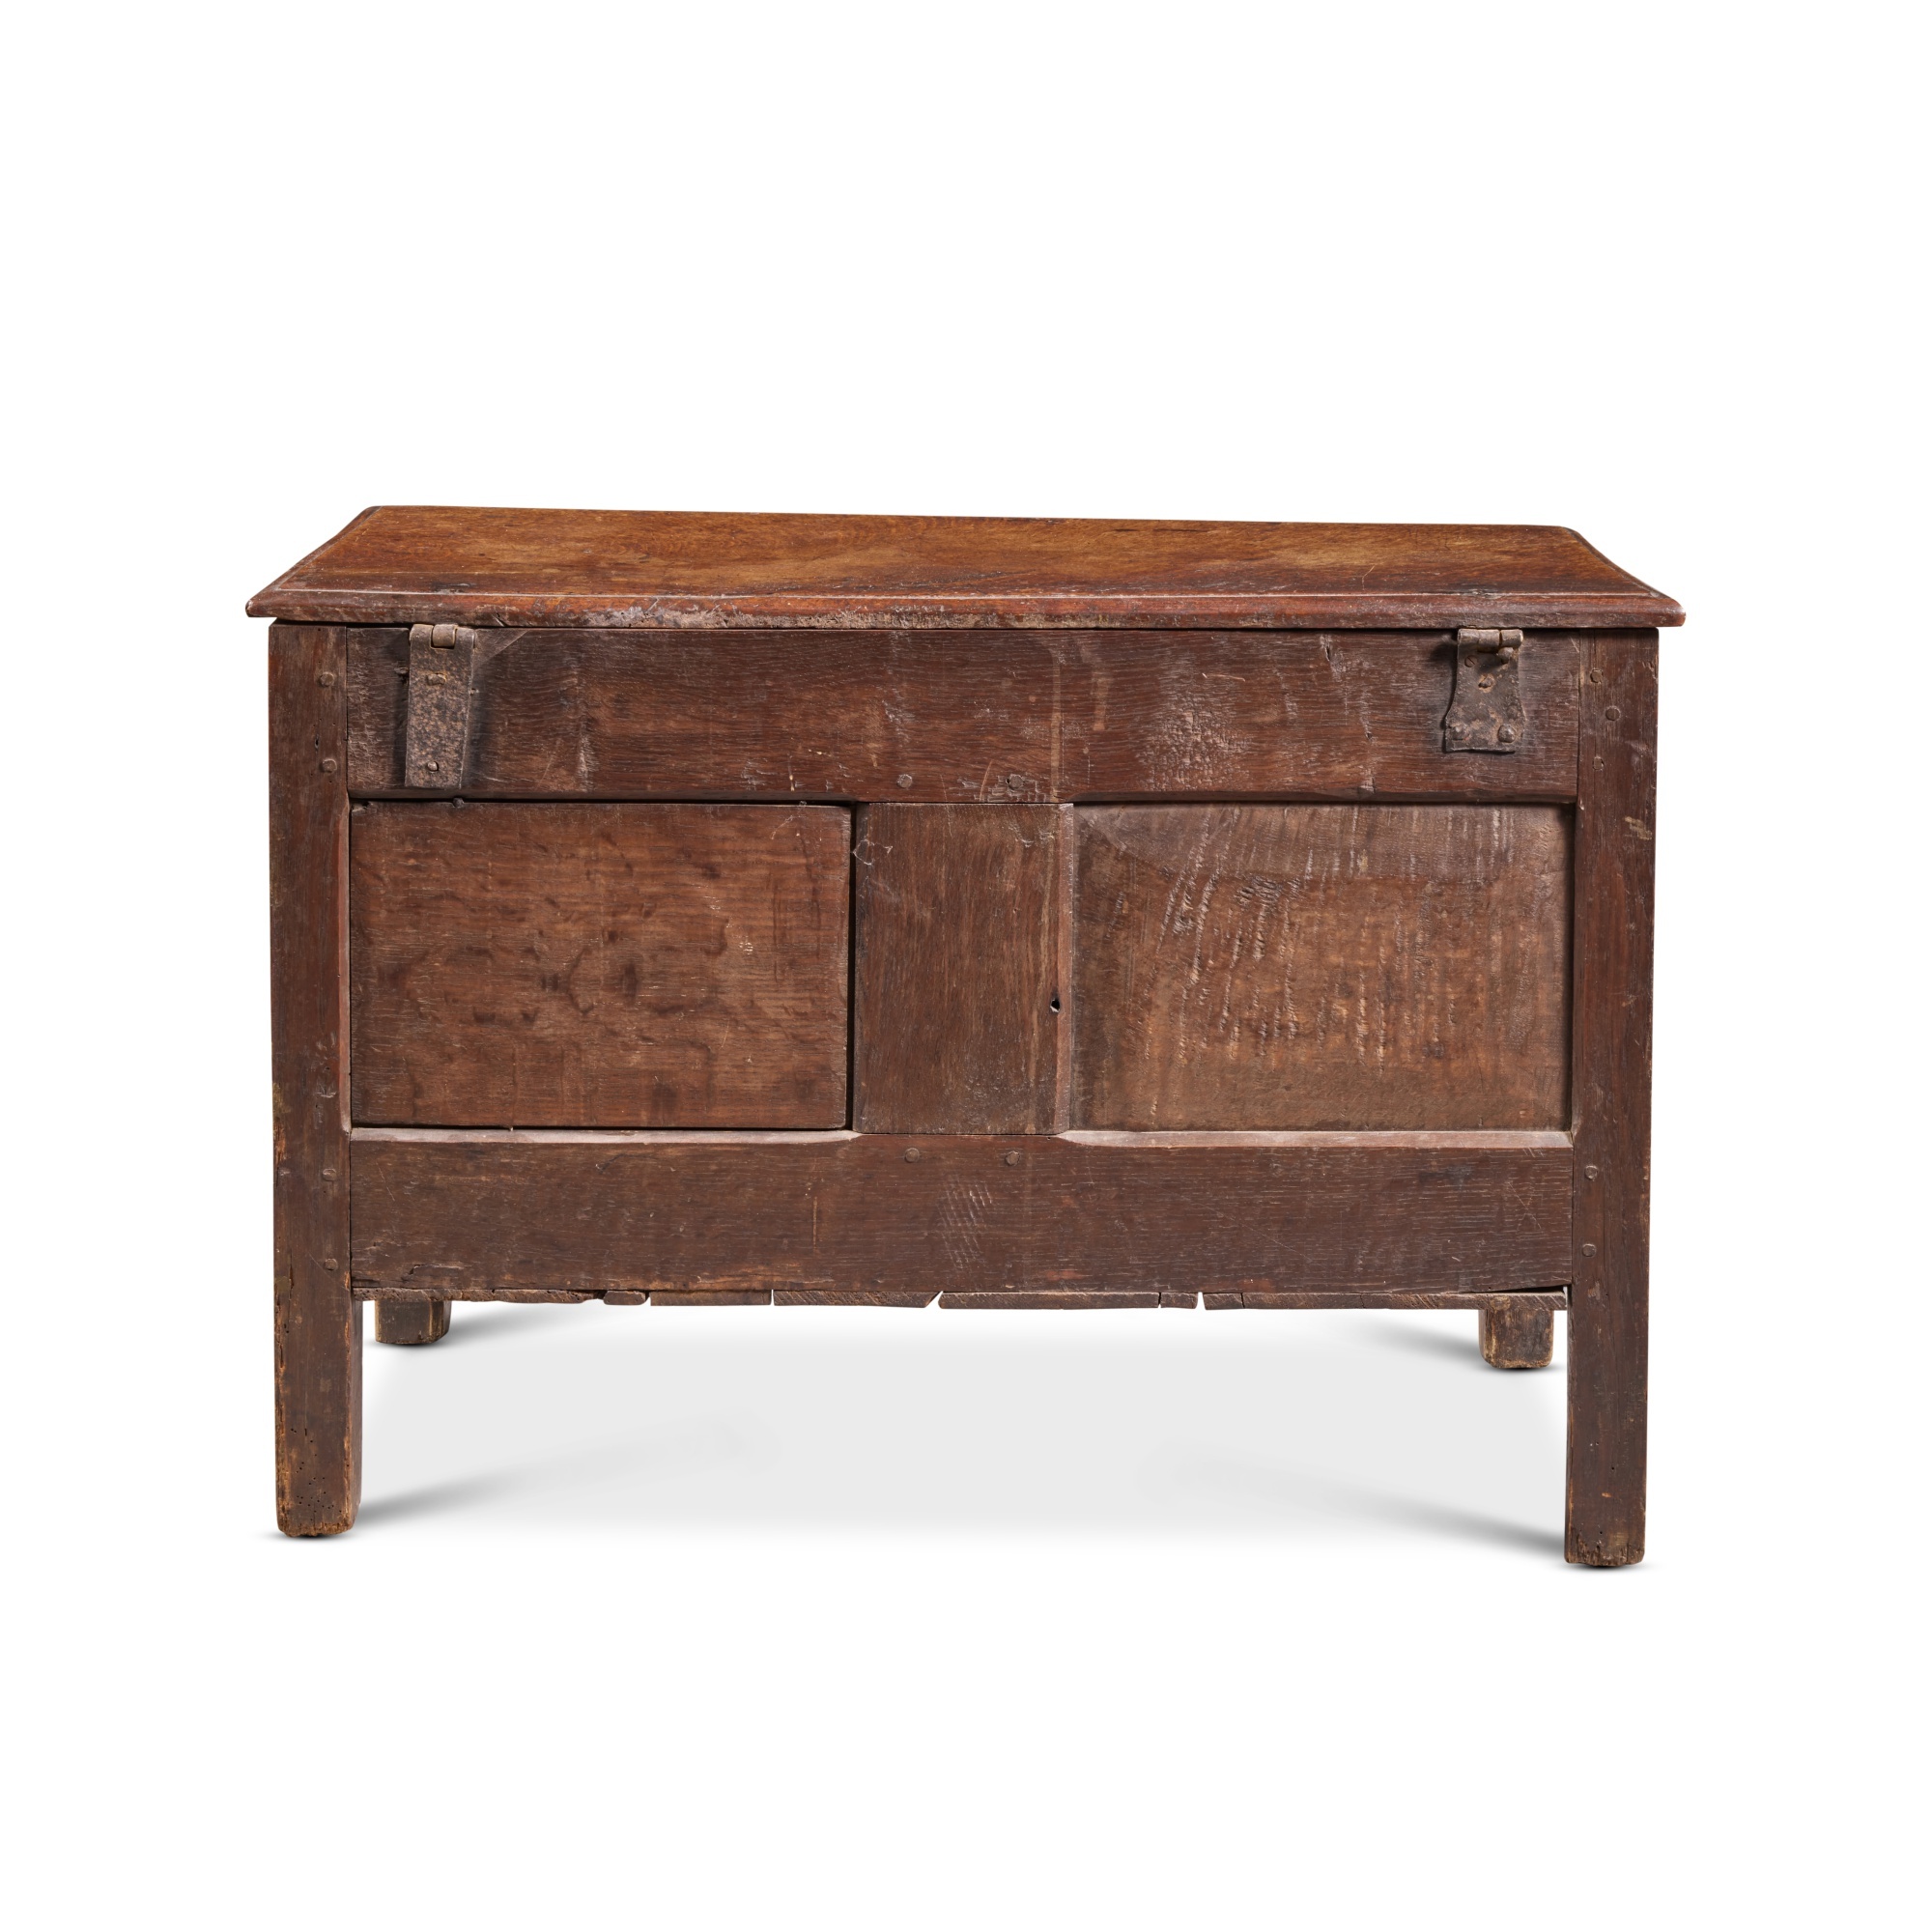 A Dutch Mannerist Carved Oak Chest, late 16th Century - Image 2 of 5